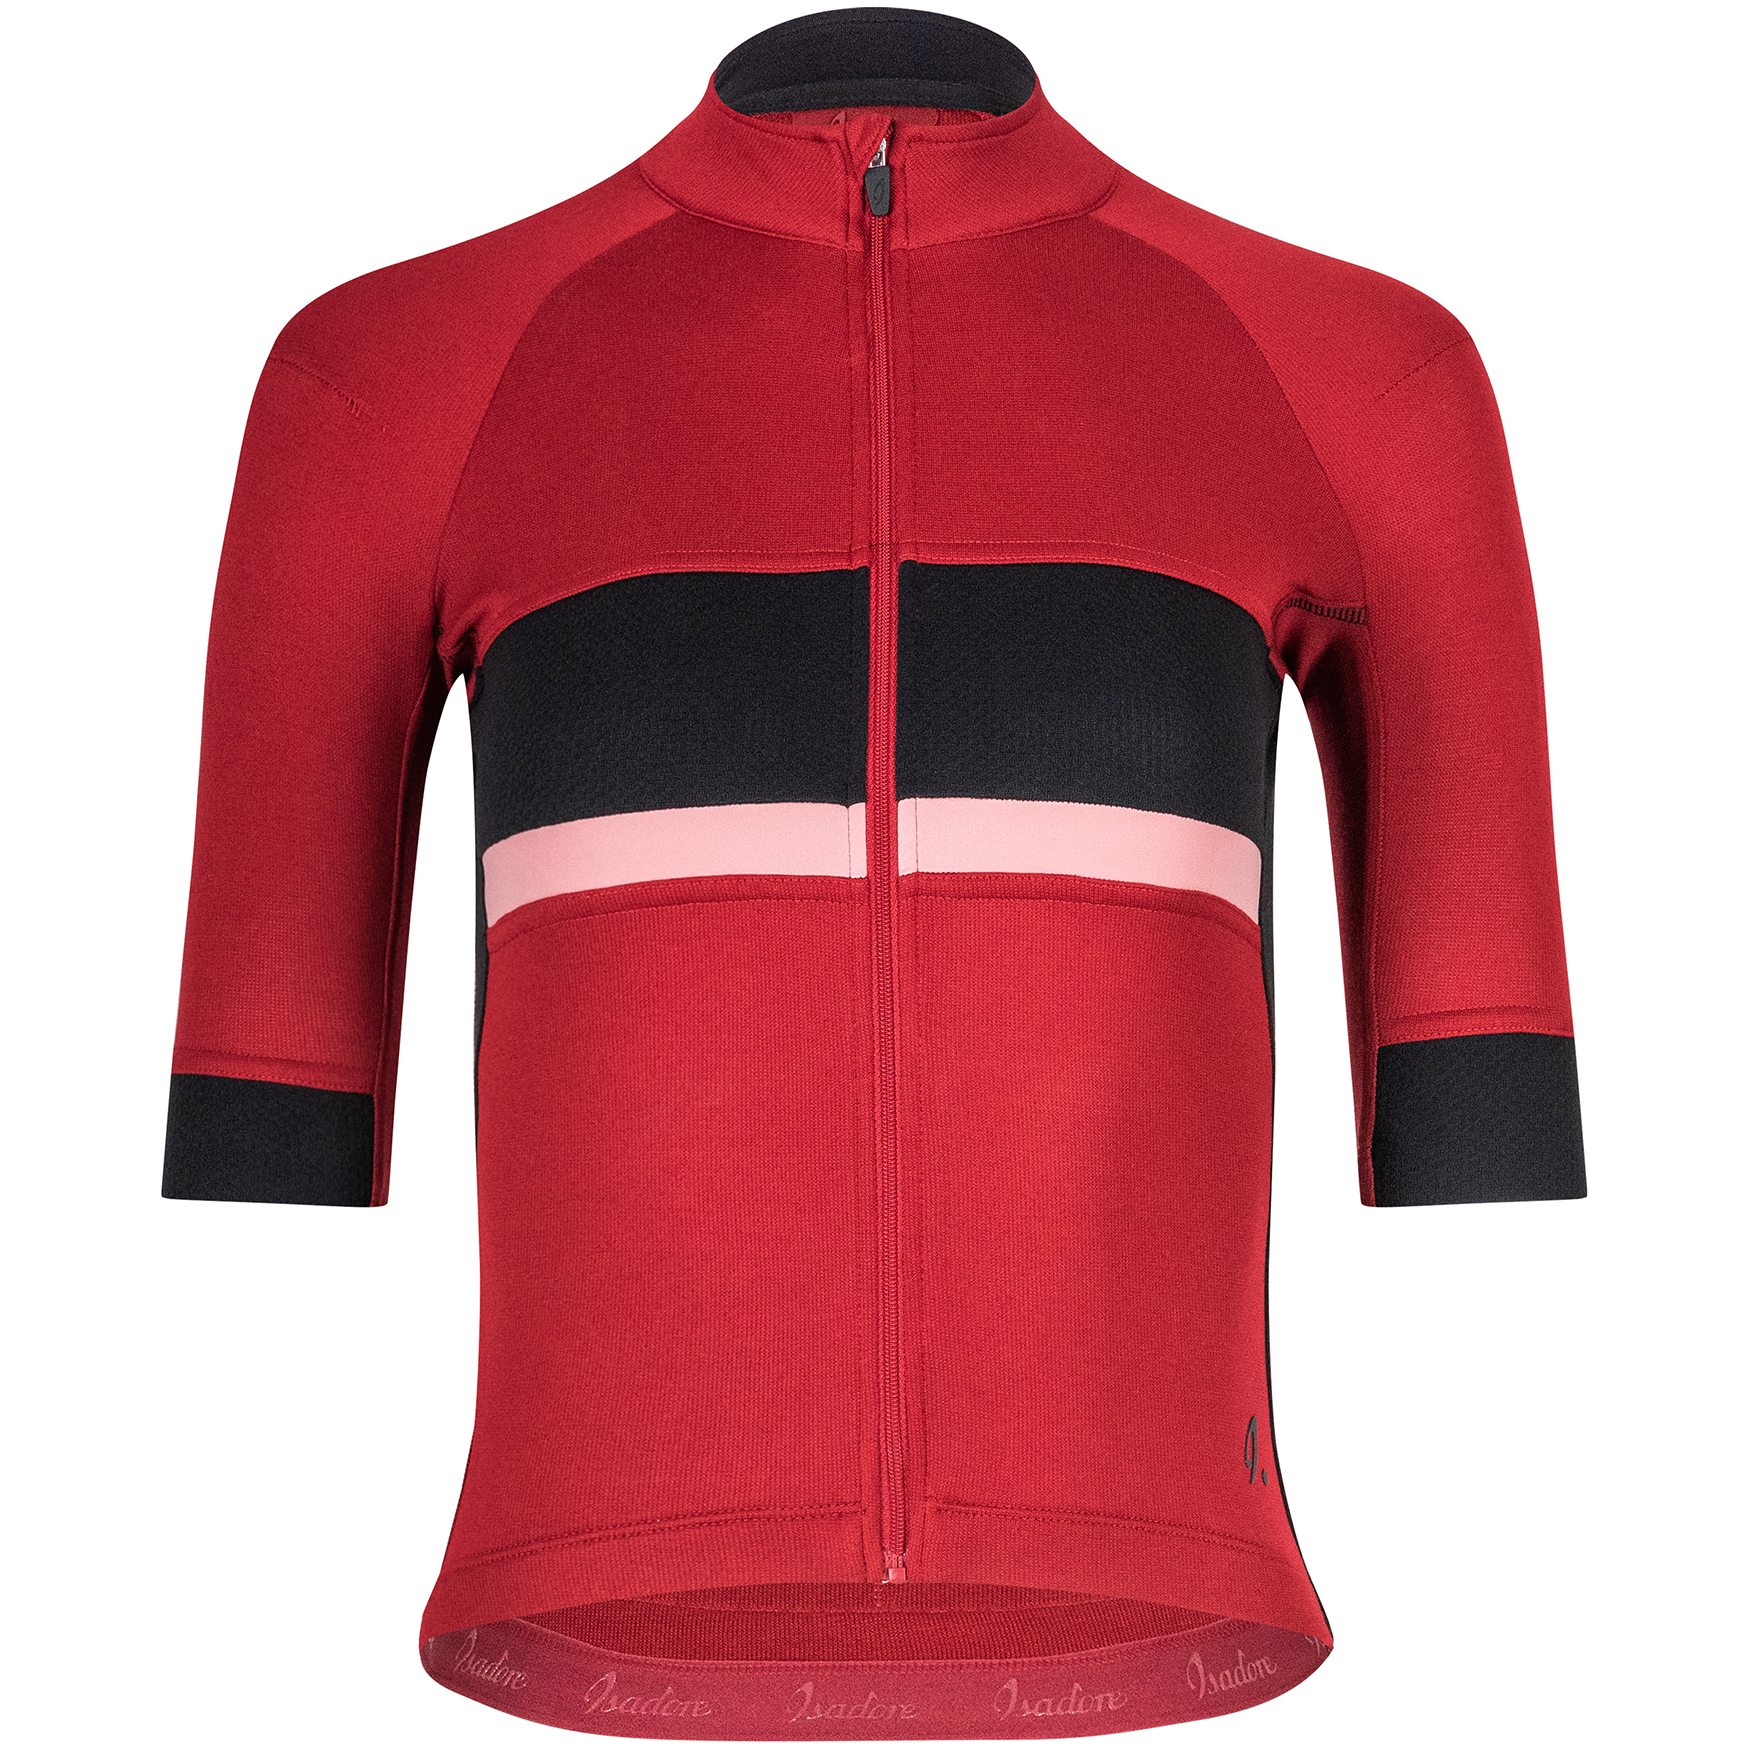 Image of Isadore Gravel Women's Shortsleeve Jersey - Rio Red